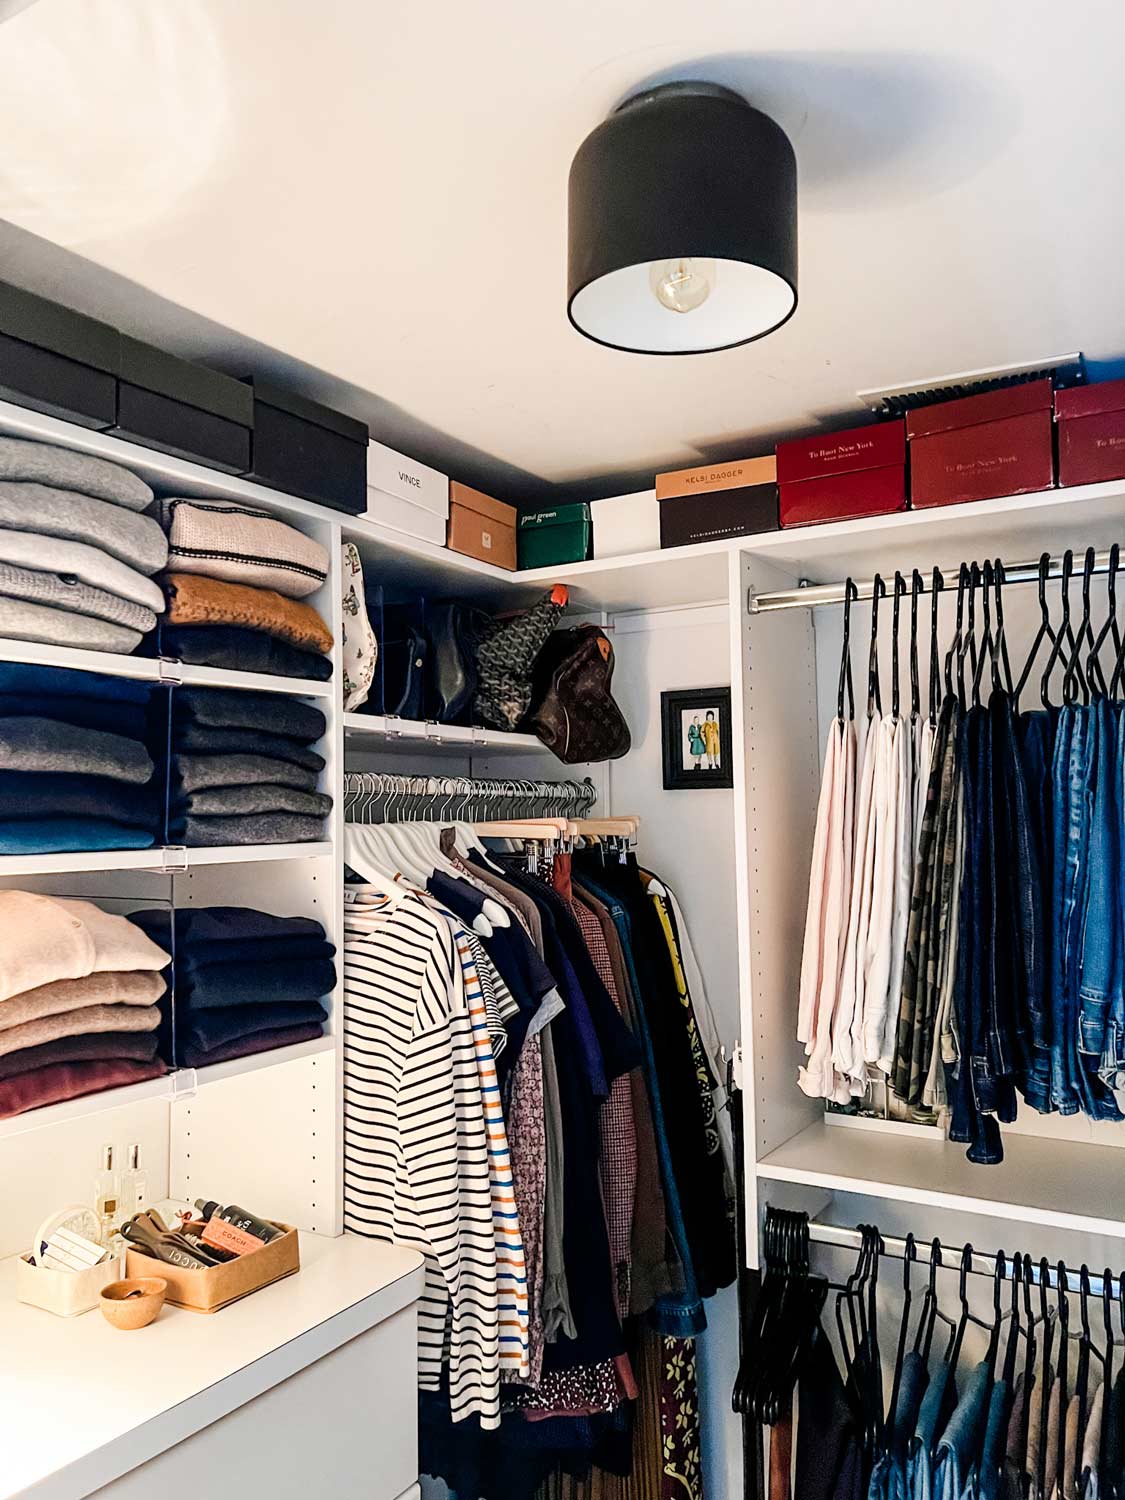 Ideas on How to Organize a Small Clothes Closet